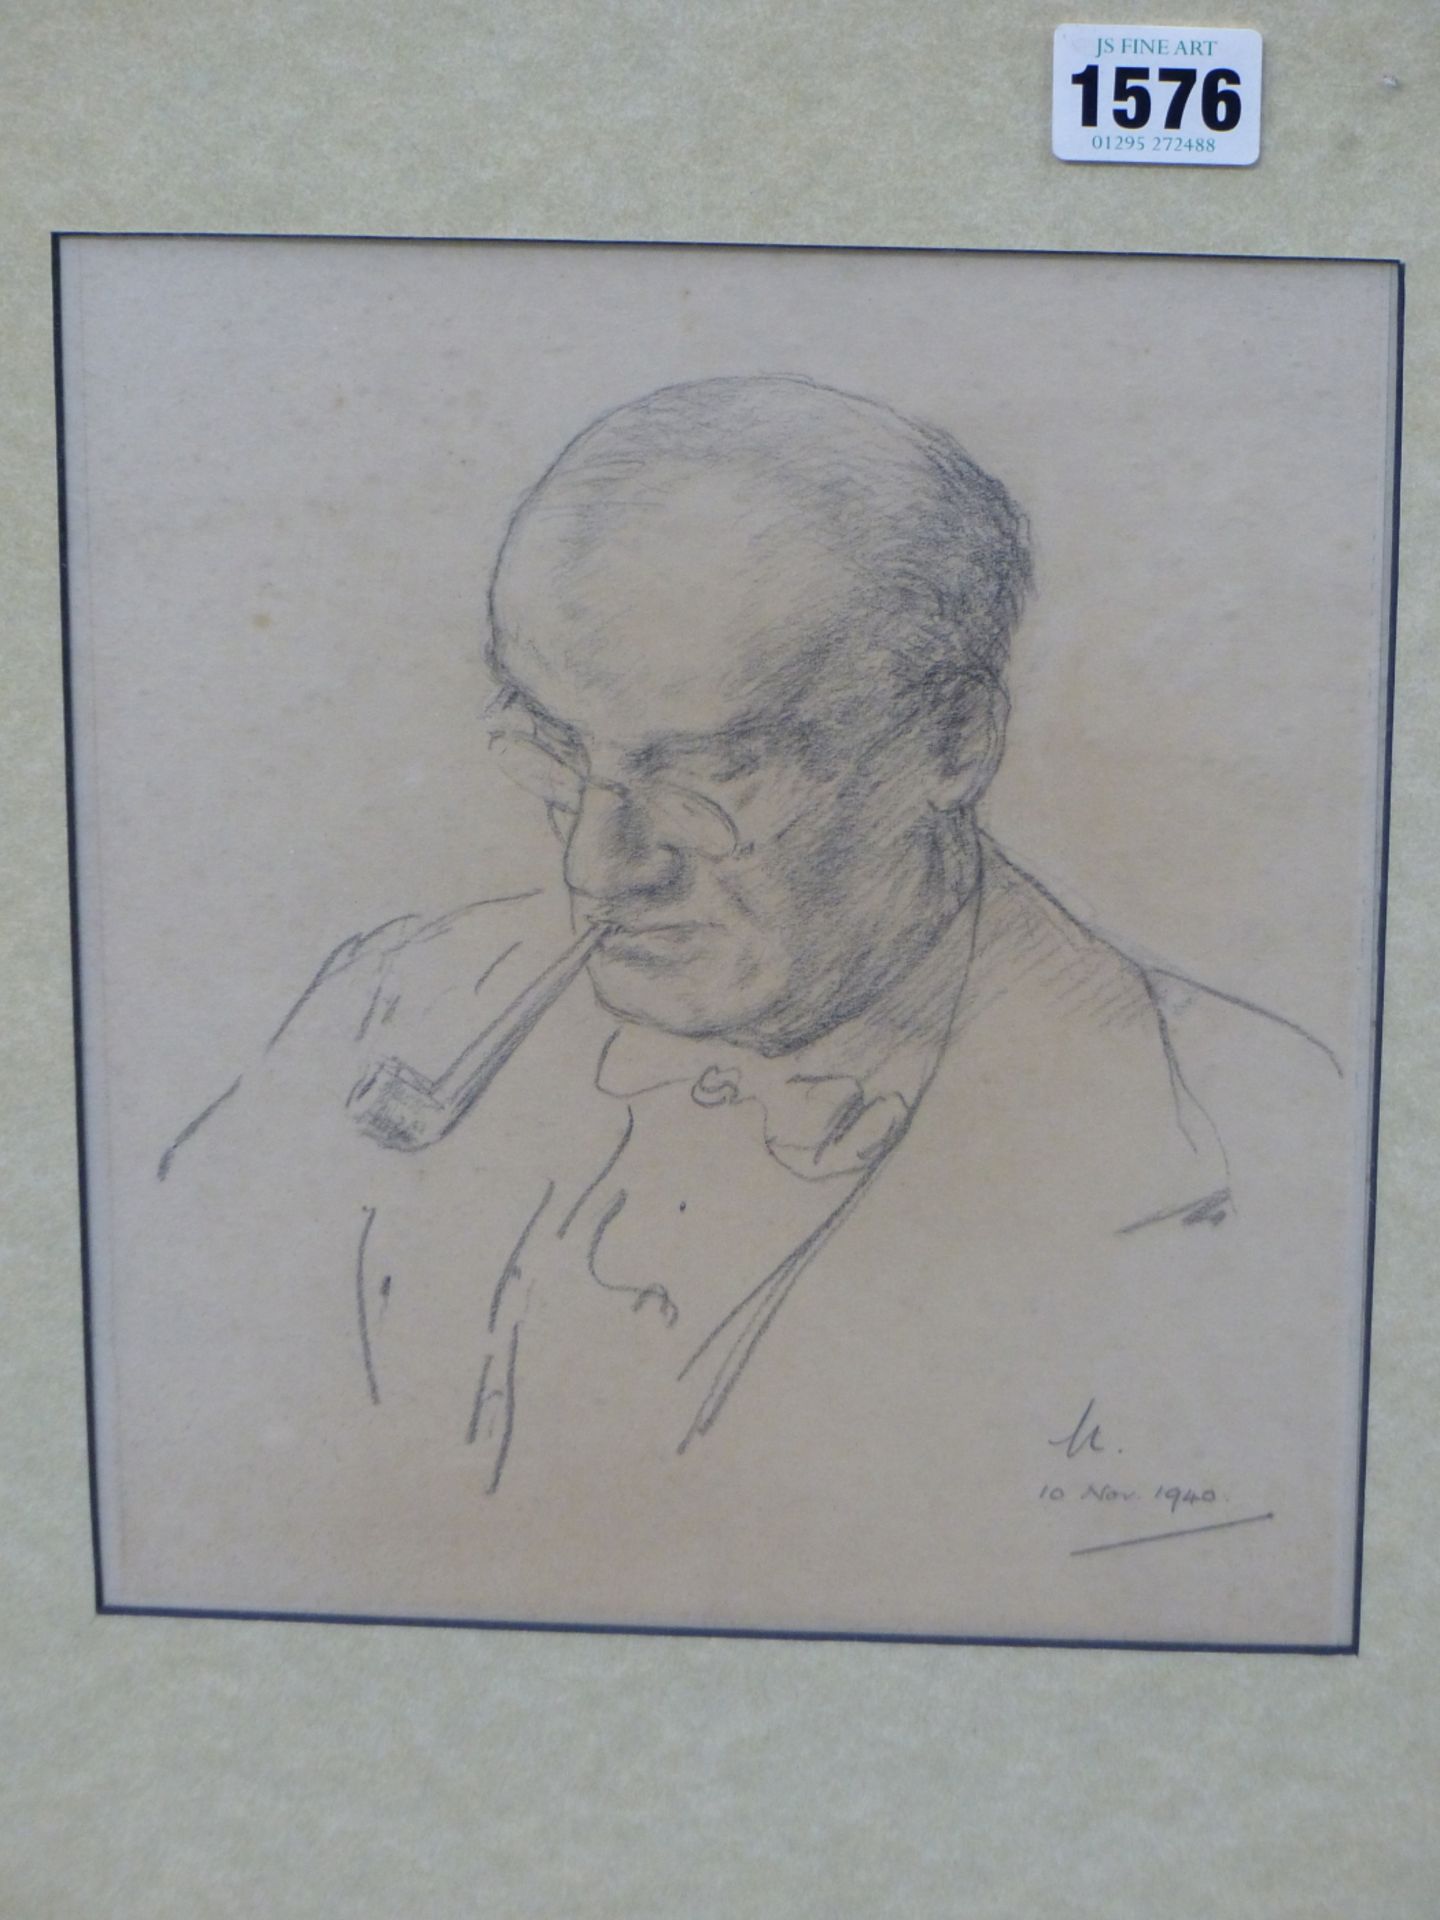 H. McDONALD CAMPBELL- PORTRAIT STUDY OF THE RT. HON. LORD MACMILLAN P.C, G.C.V.O- PENCIL ON PAPER, - Image 2 of 6